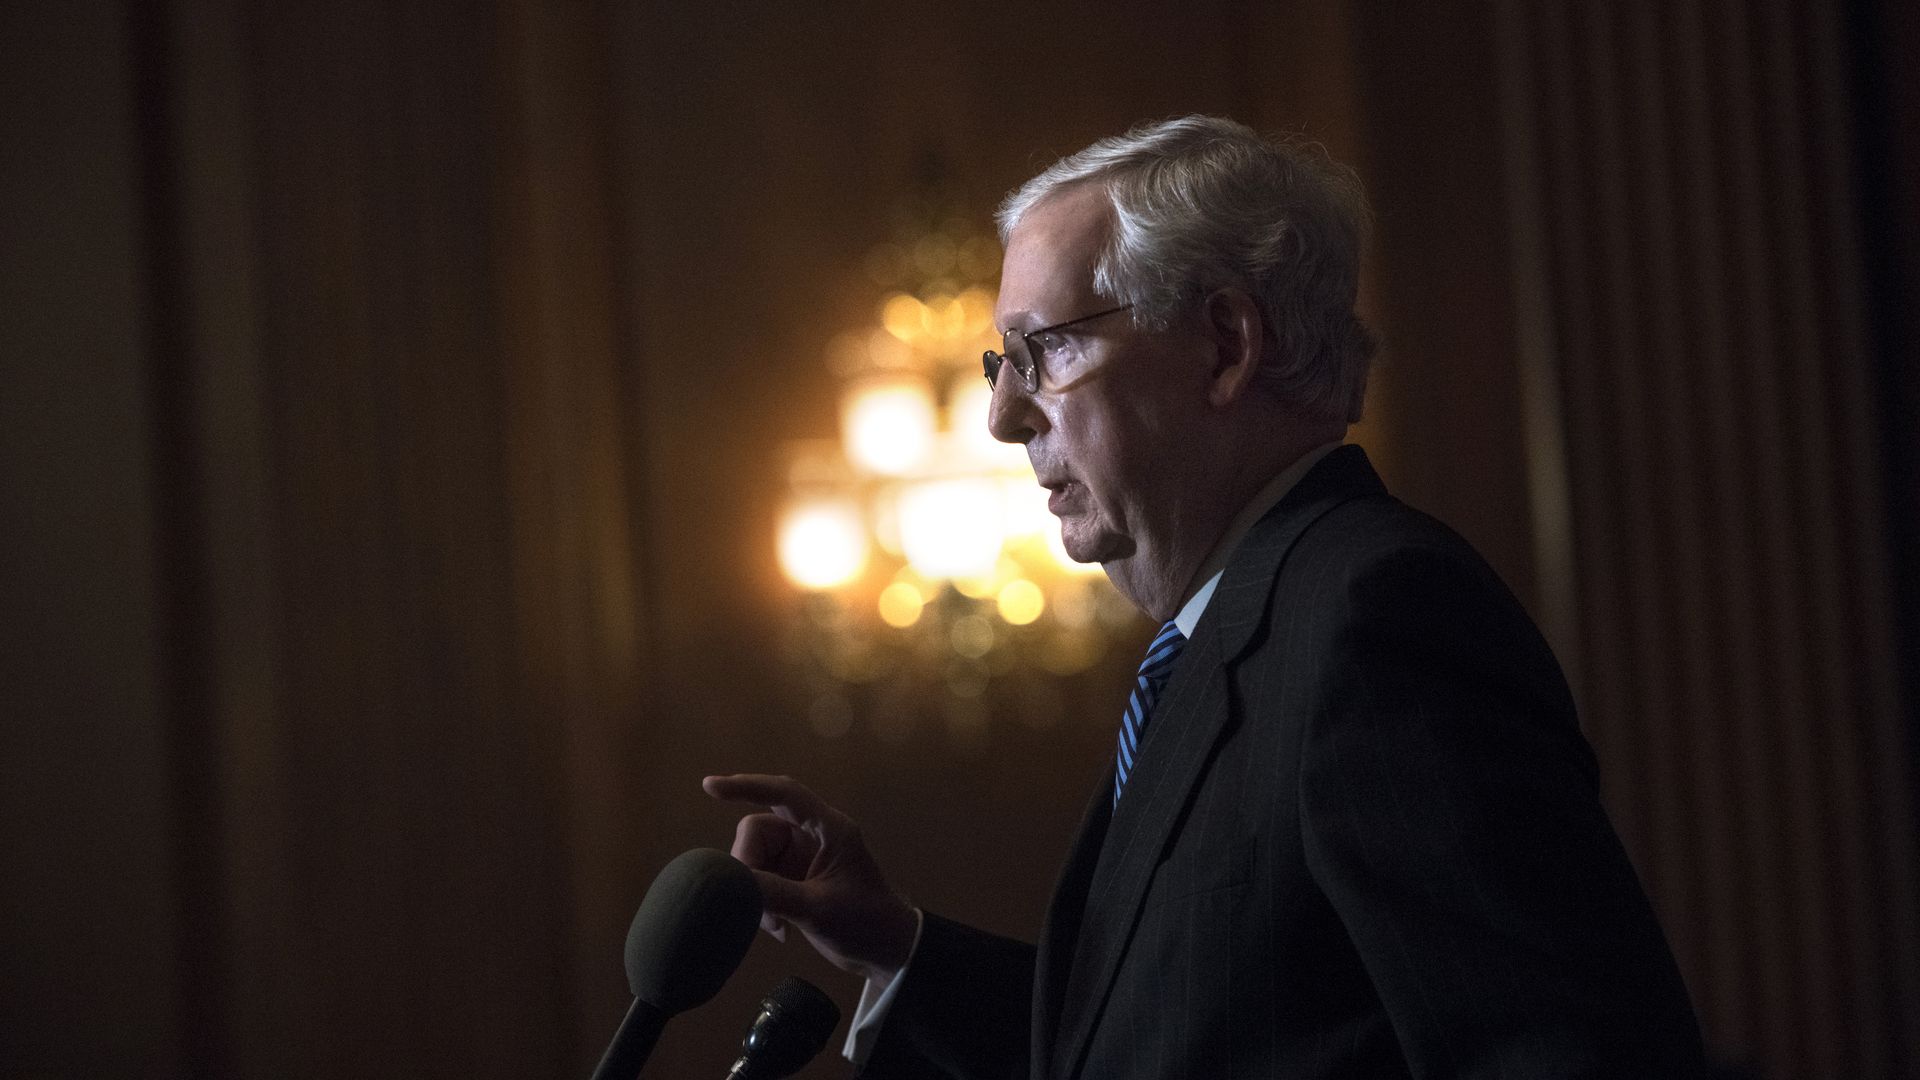 Senate Majority Leader Mitch McConnell is seen speaking during a news conference in December.